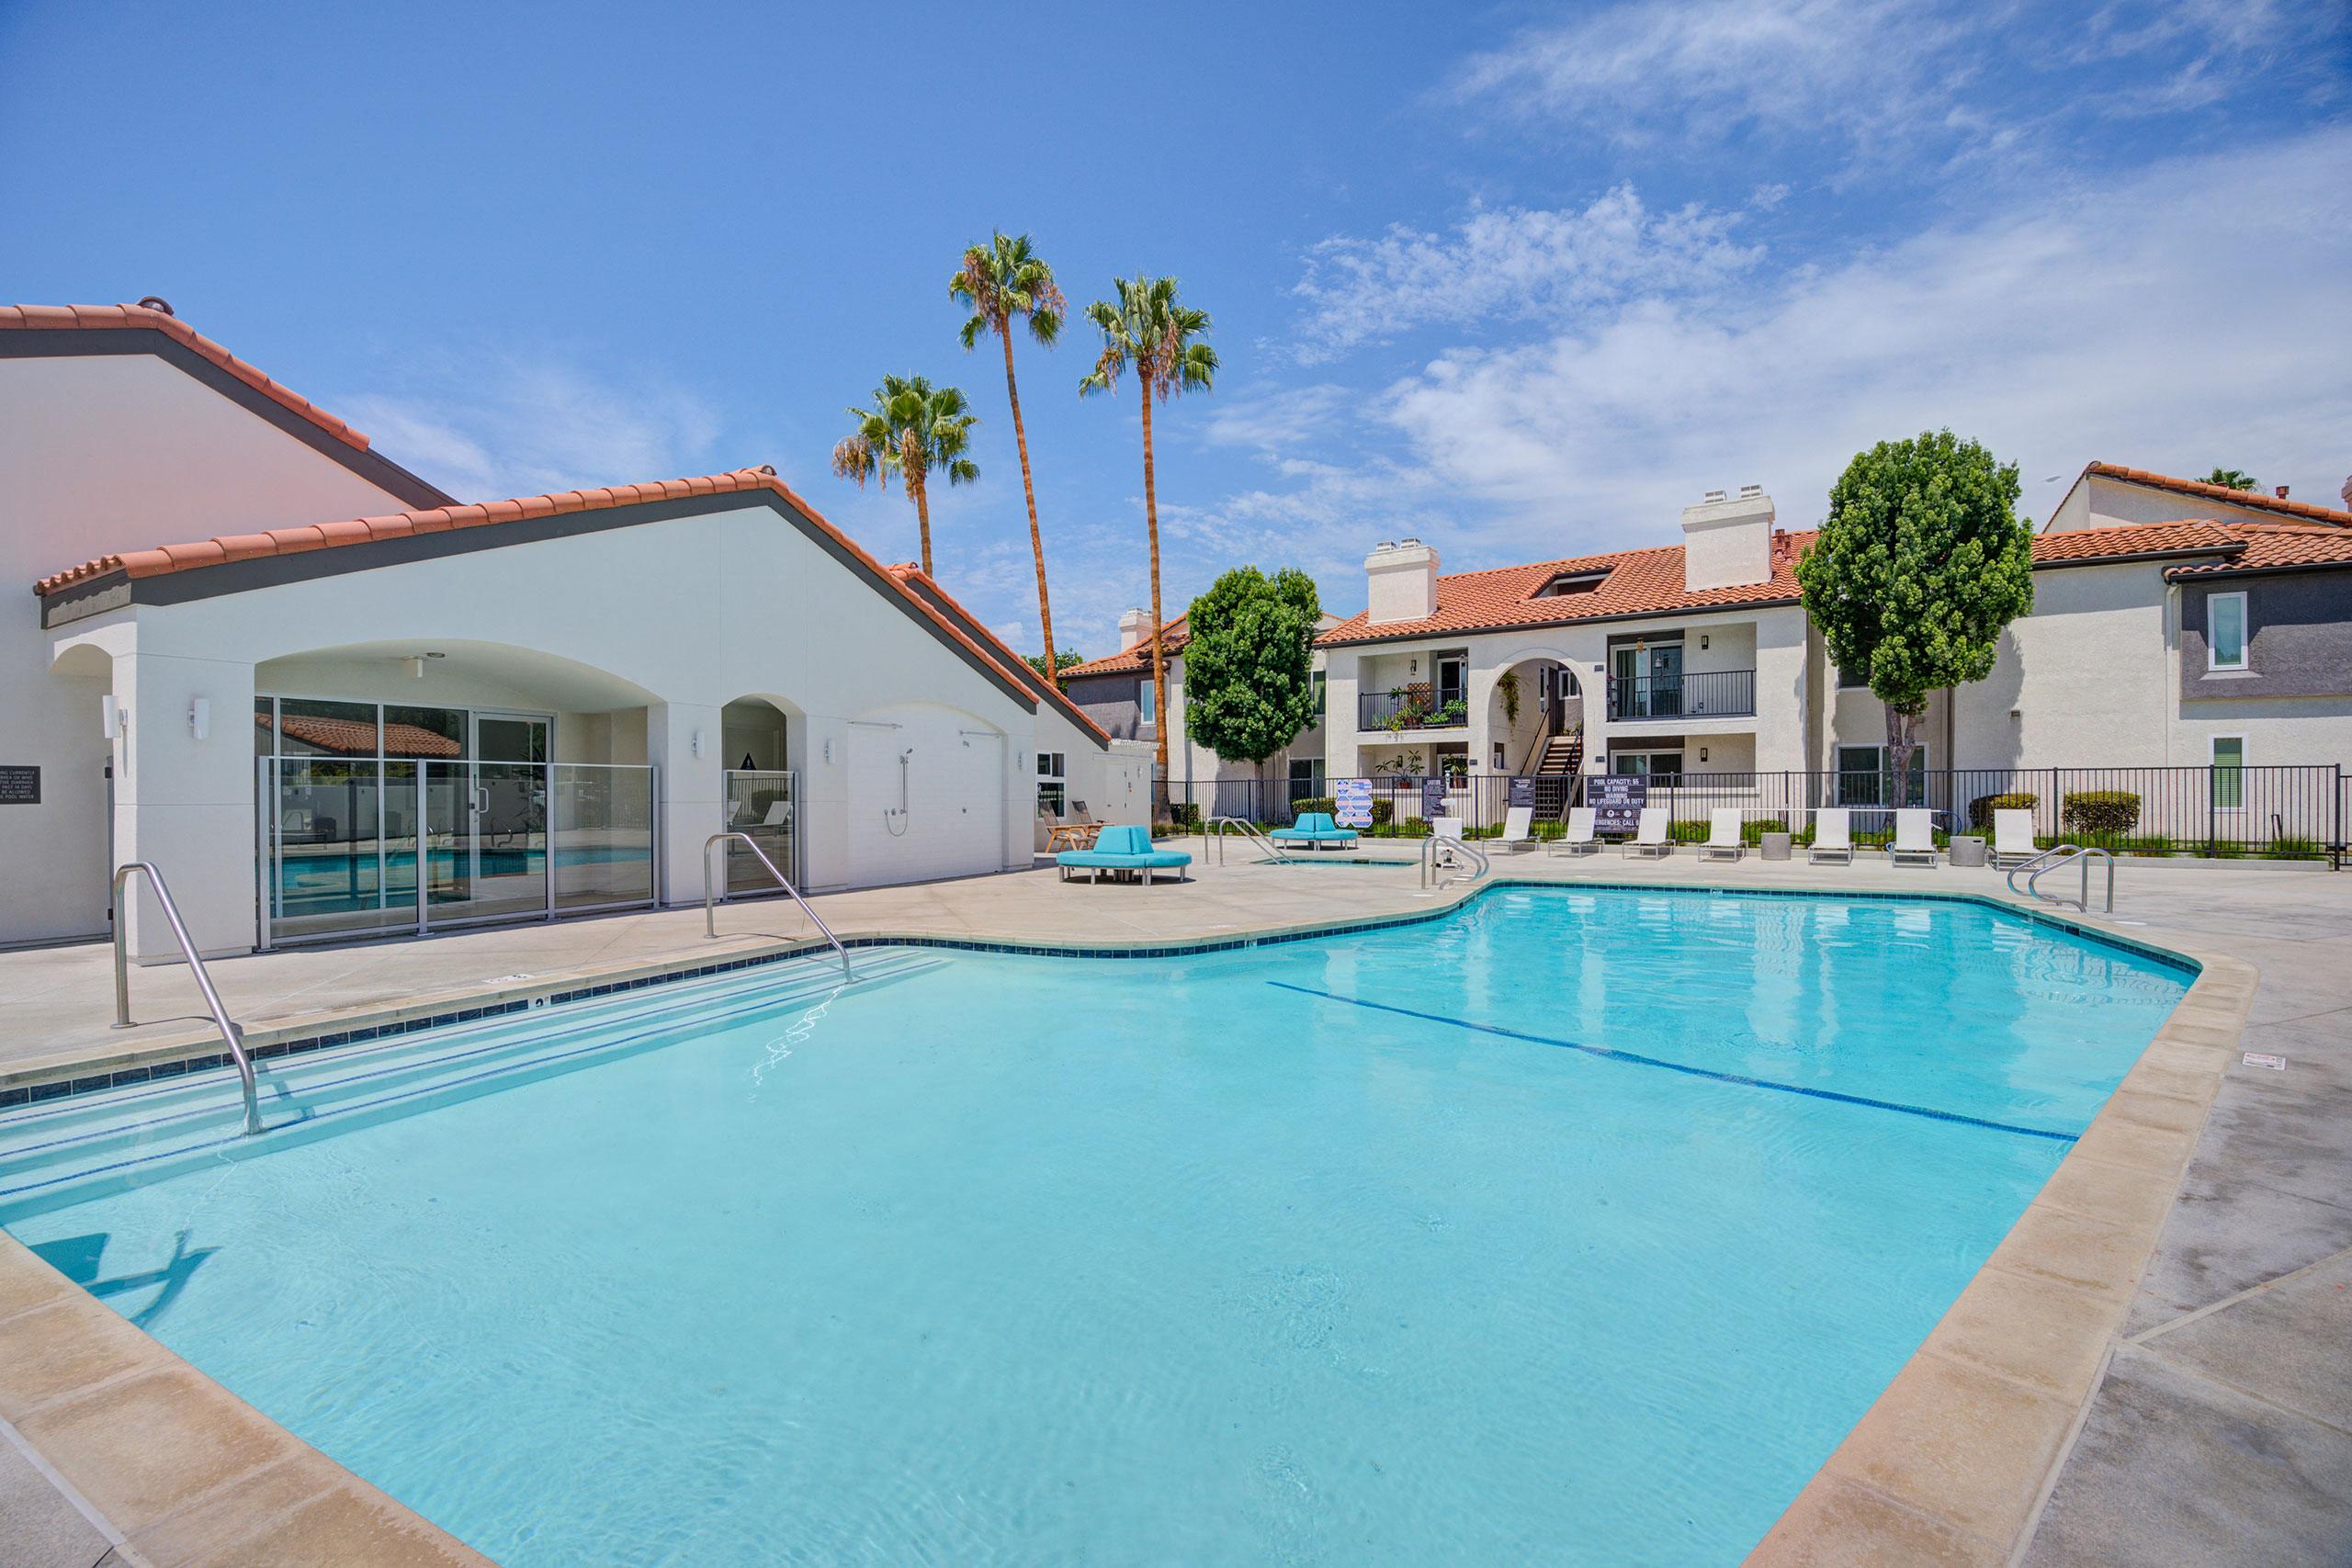 a large swimming pool with lounge chairs and palm trees in the background  at Laguna Gardens Apts., Laguna Niguel, California